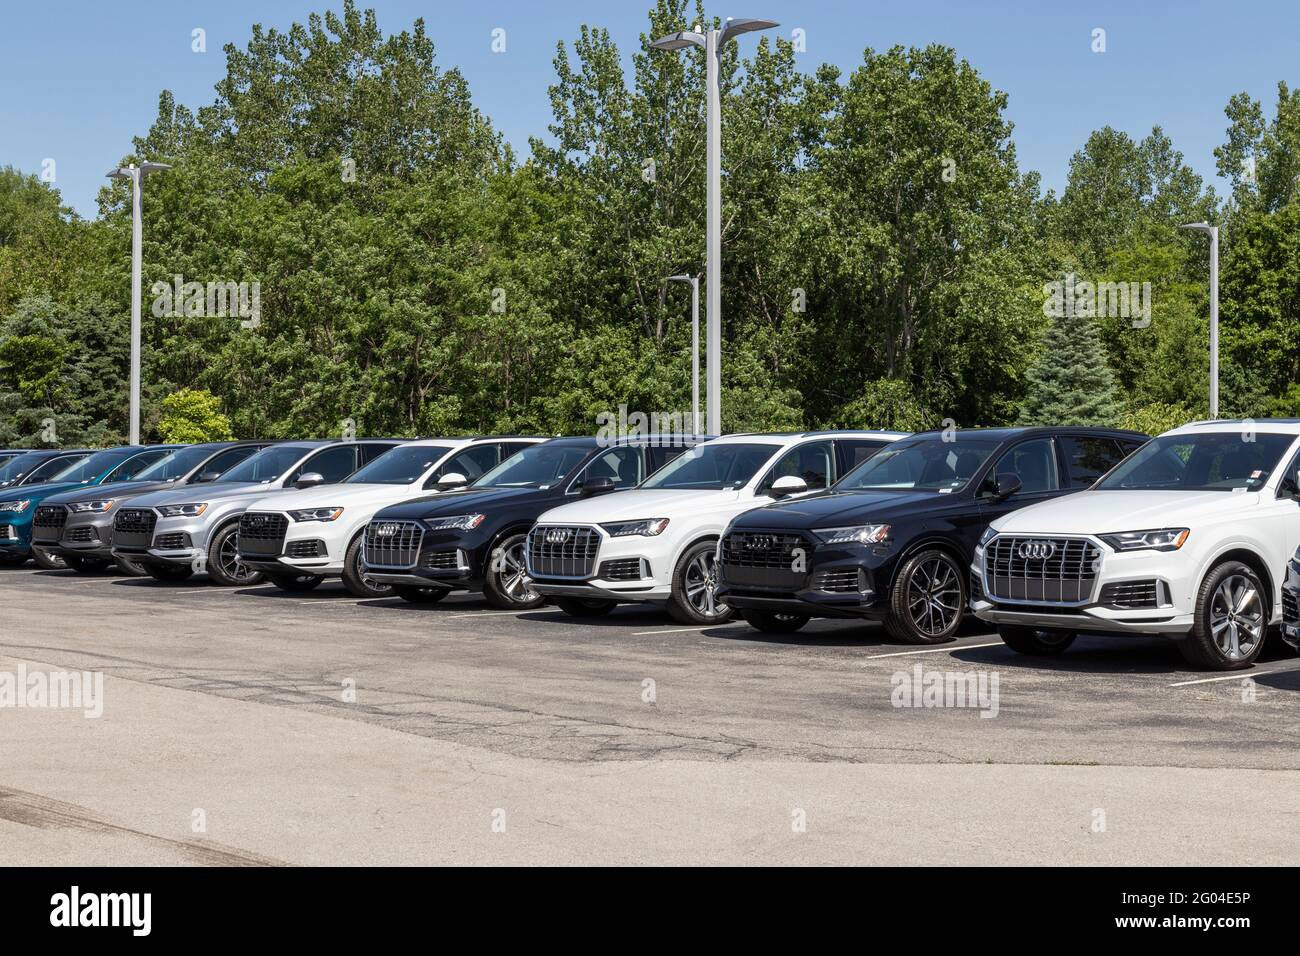 Indianapolis - Circa May 2021: Audi Automobile and SUV luxury car dealership. Audi is a luxury member of the Volkswagen Group. Stock Photo